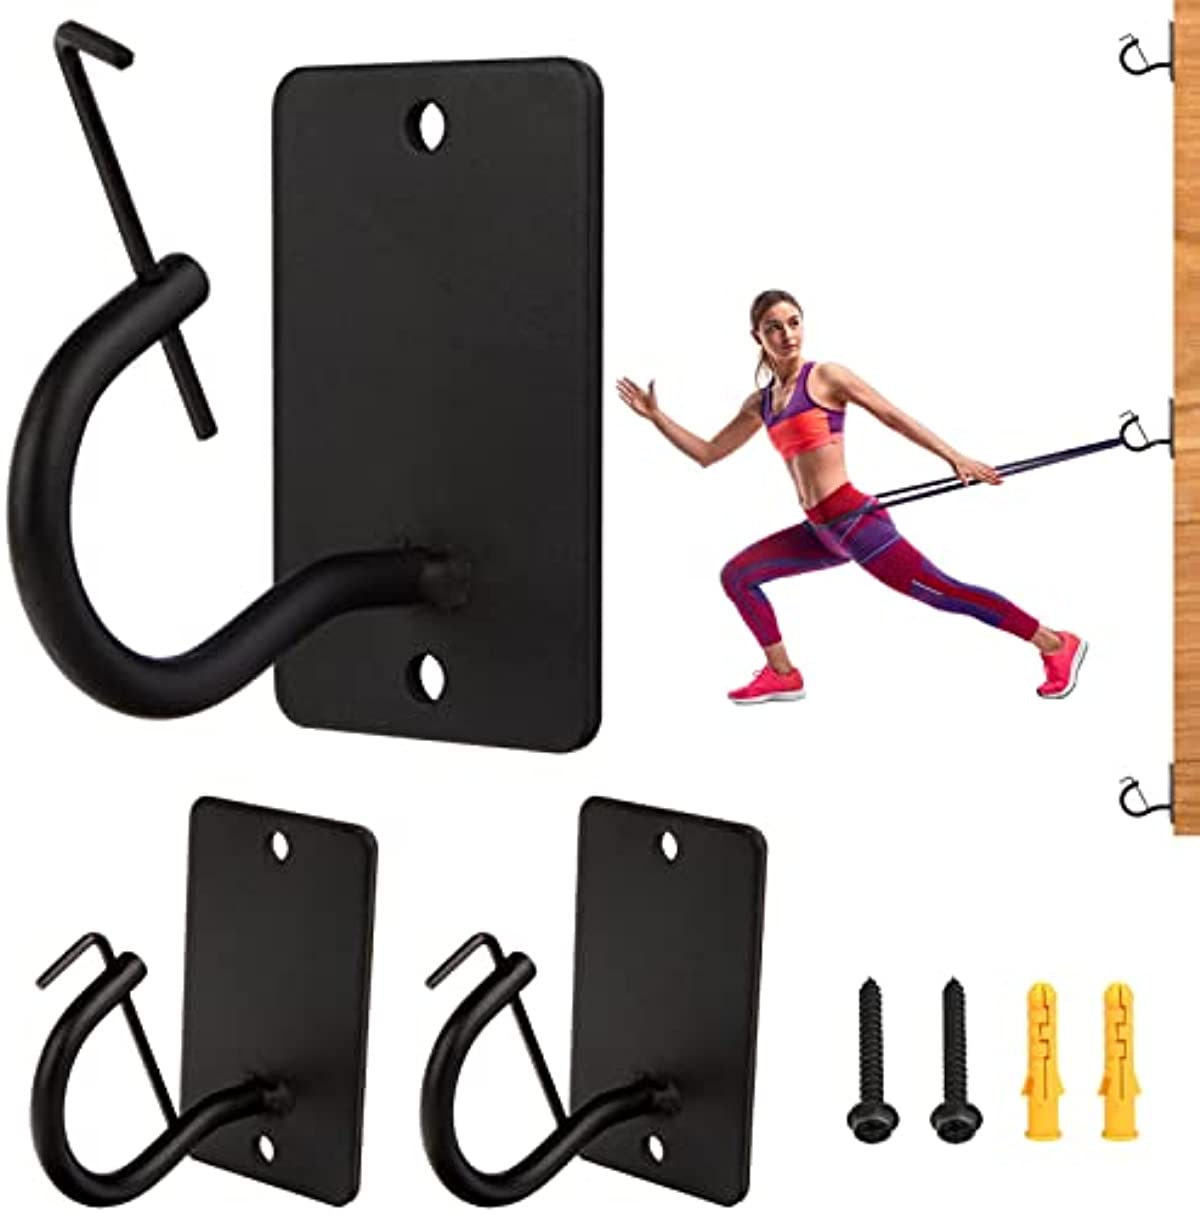 3Pcs Exercise Bands Wall Anchors,Gym Body Weight Straps Workout Anchor,Heavy Duty Wall Mount Workout Anchors,for Home Office Strength Training Stretching Exercise